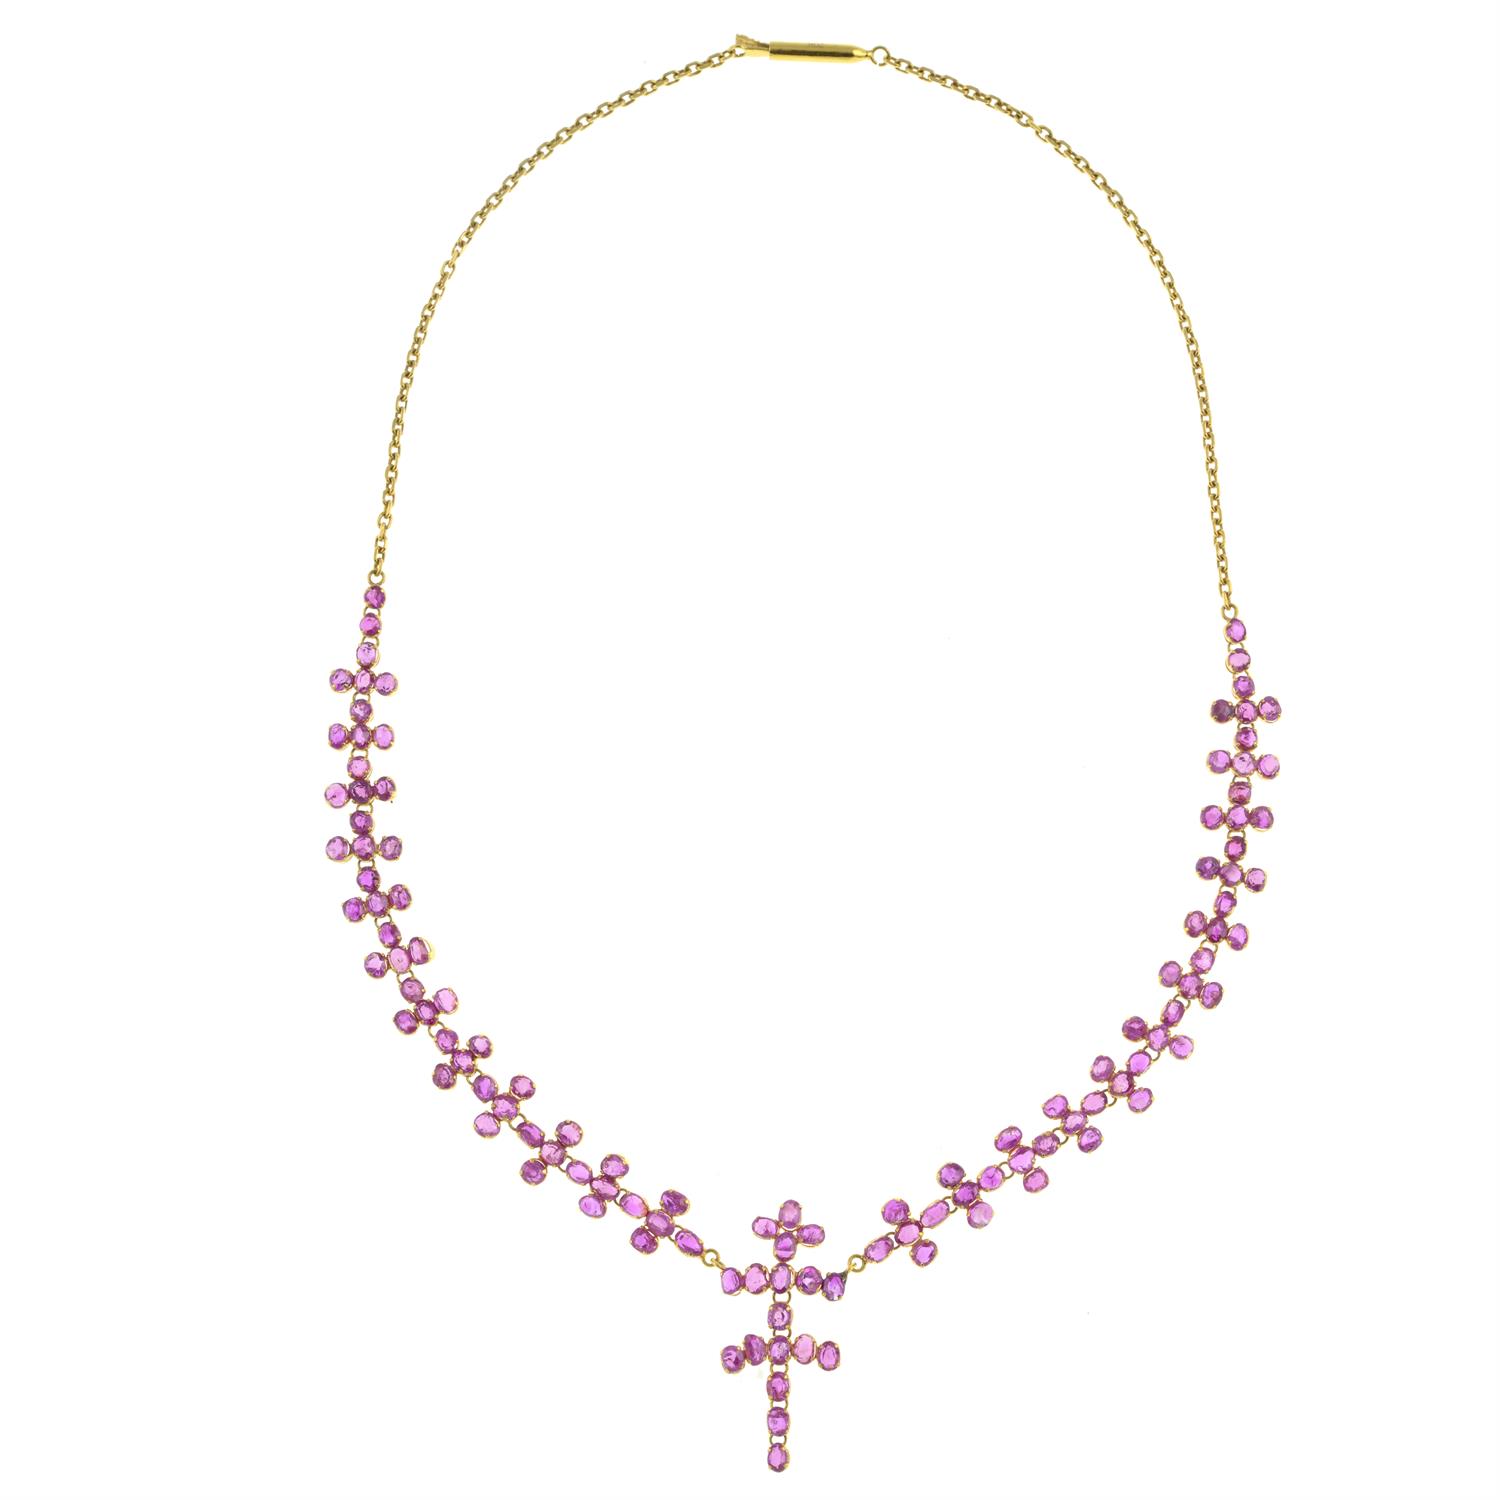 Pink sapphire necklace - Image 3 of 6